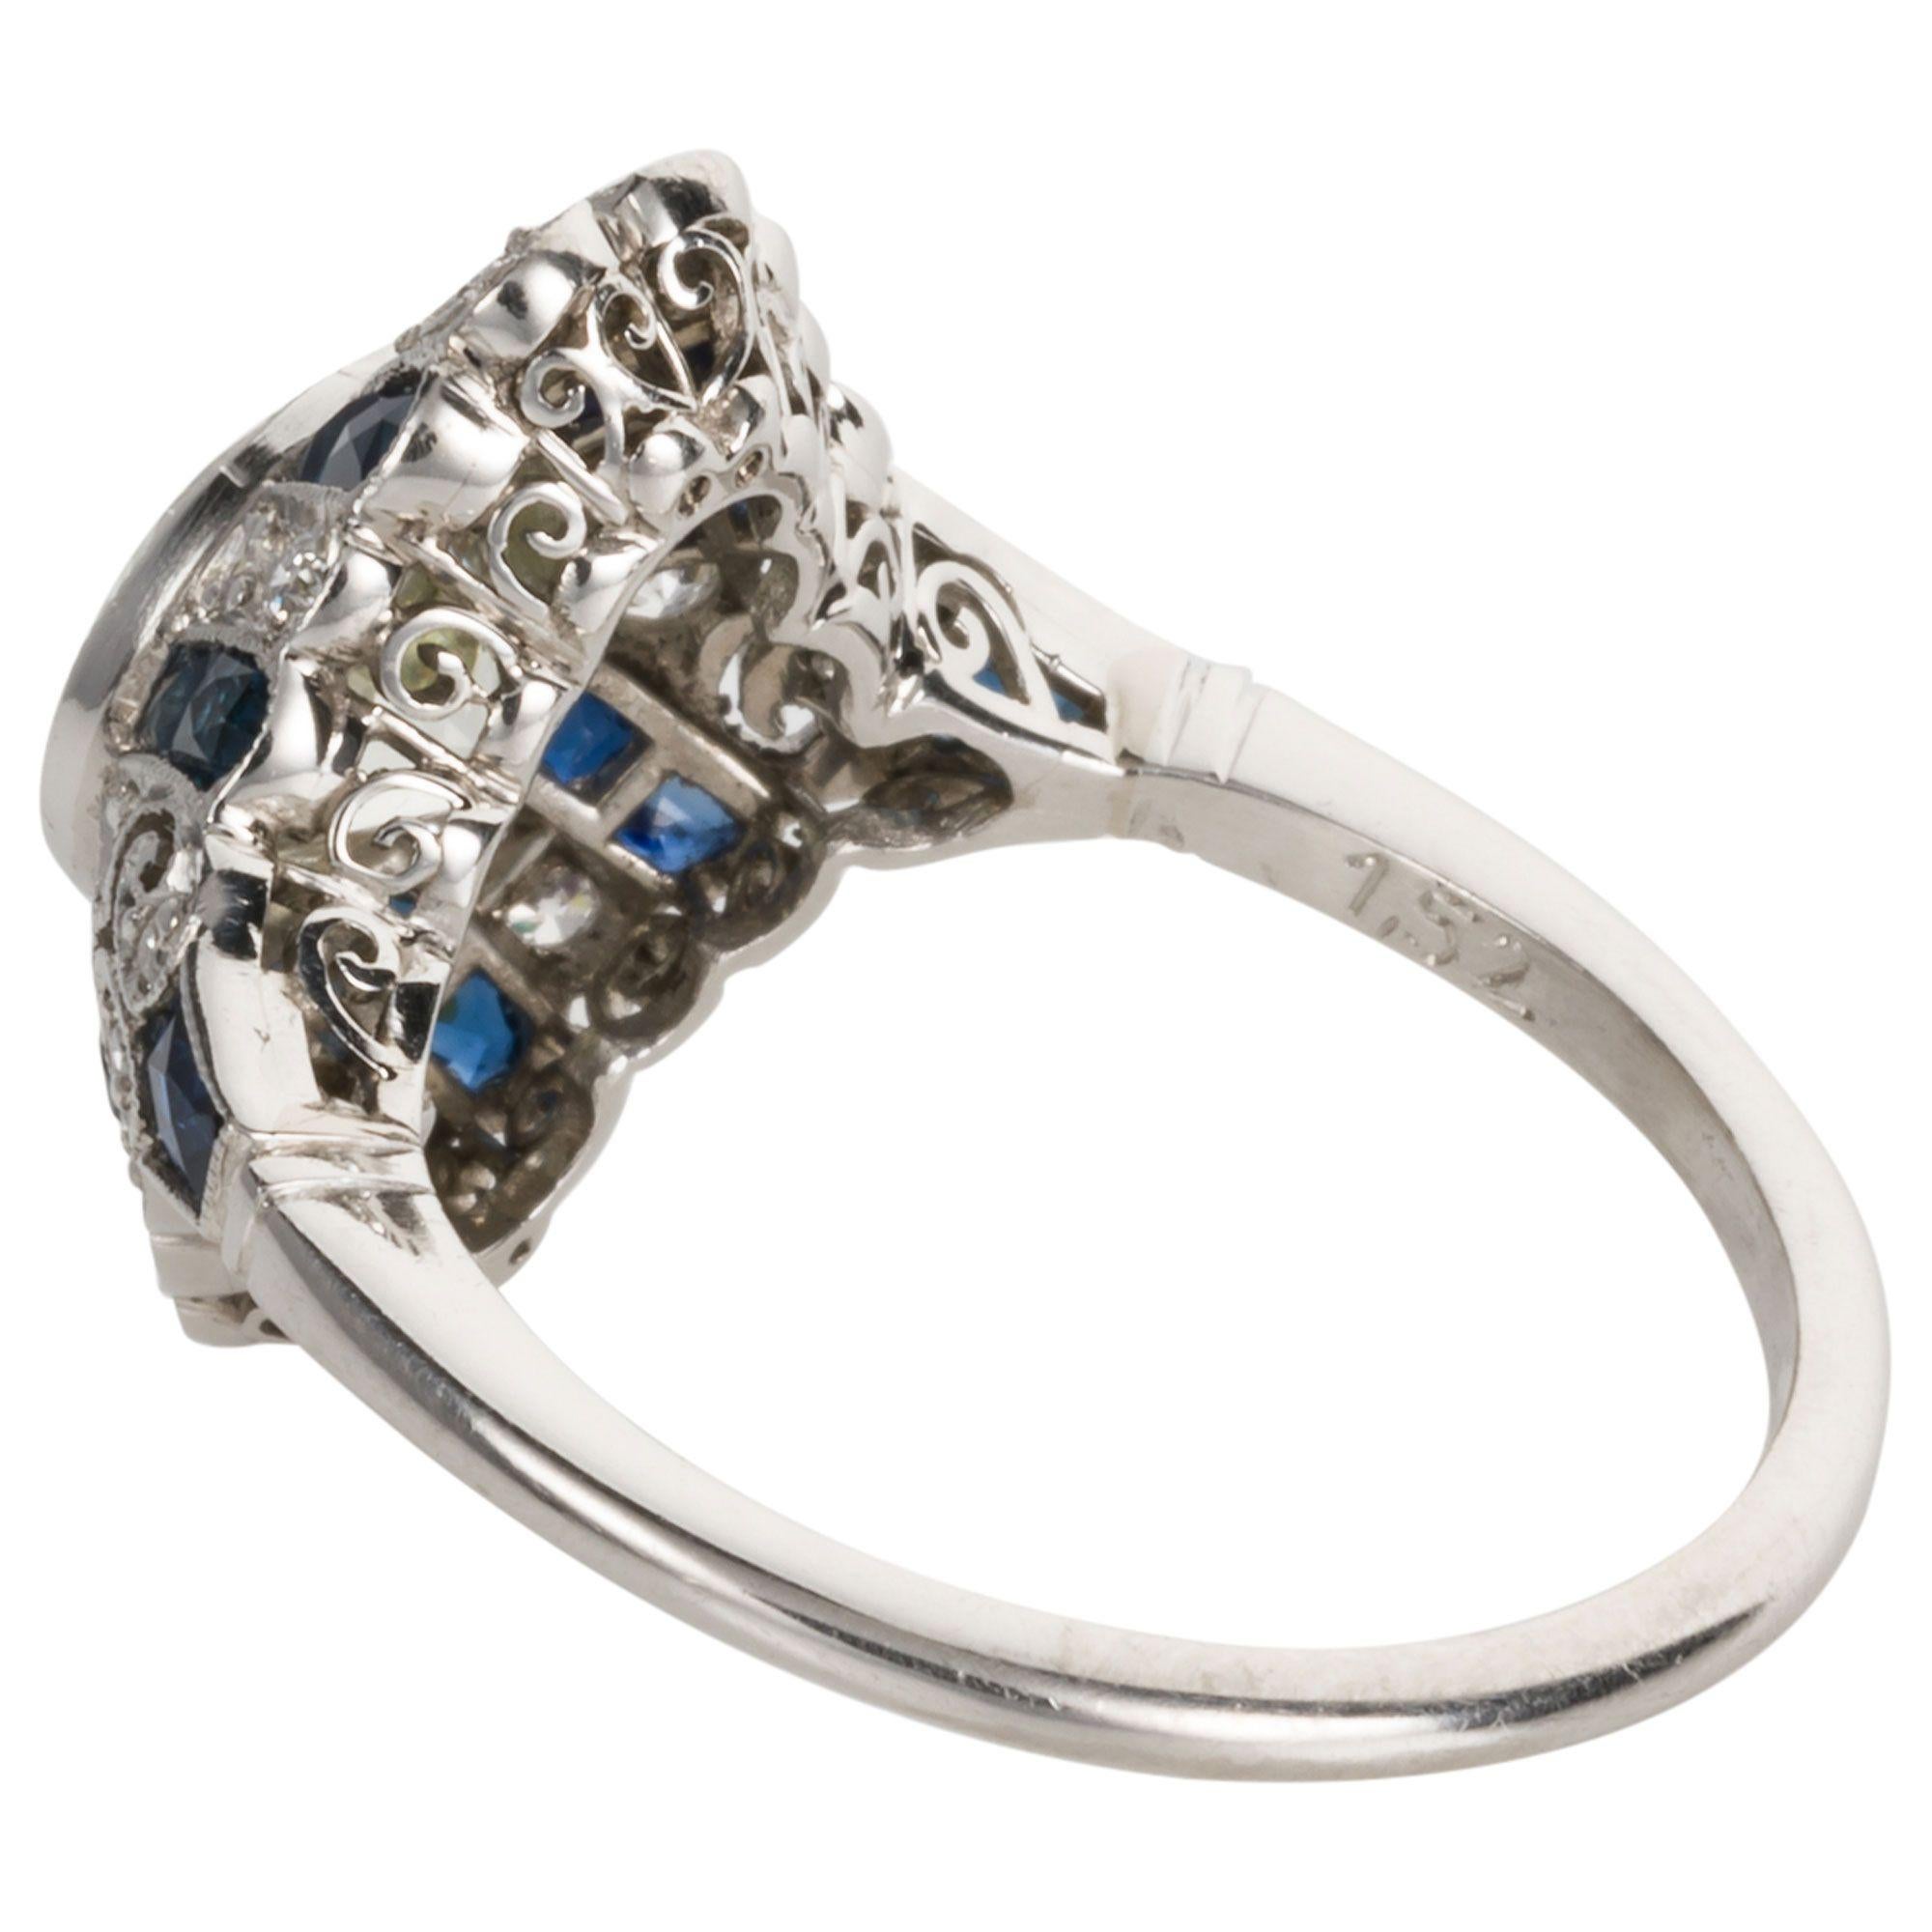 1.52 Carat Old European Cut Diamond and Sapphire Art Deco Inspired Ring For Sale 1